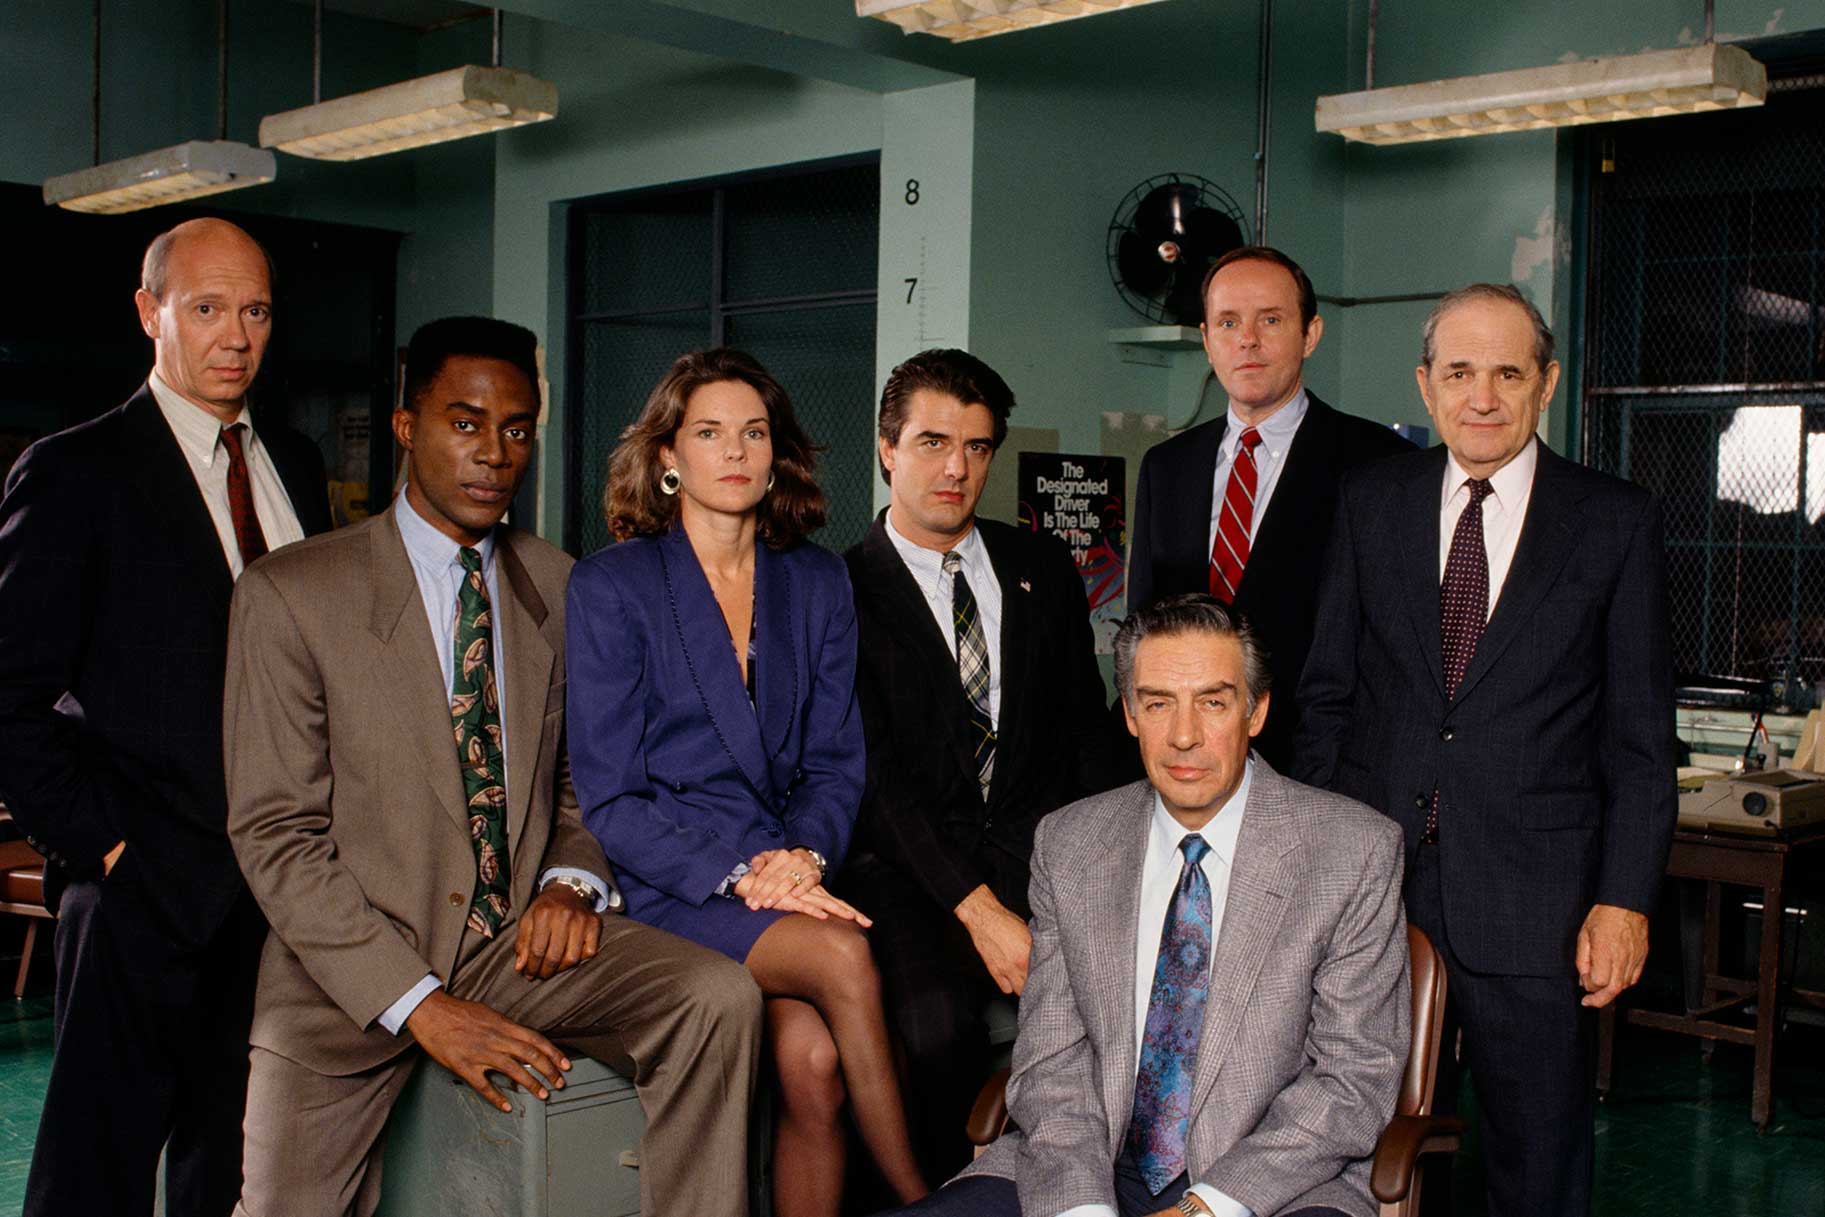 How Law And Order Cast Has Changed Over The Years